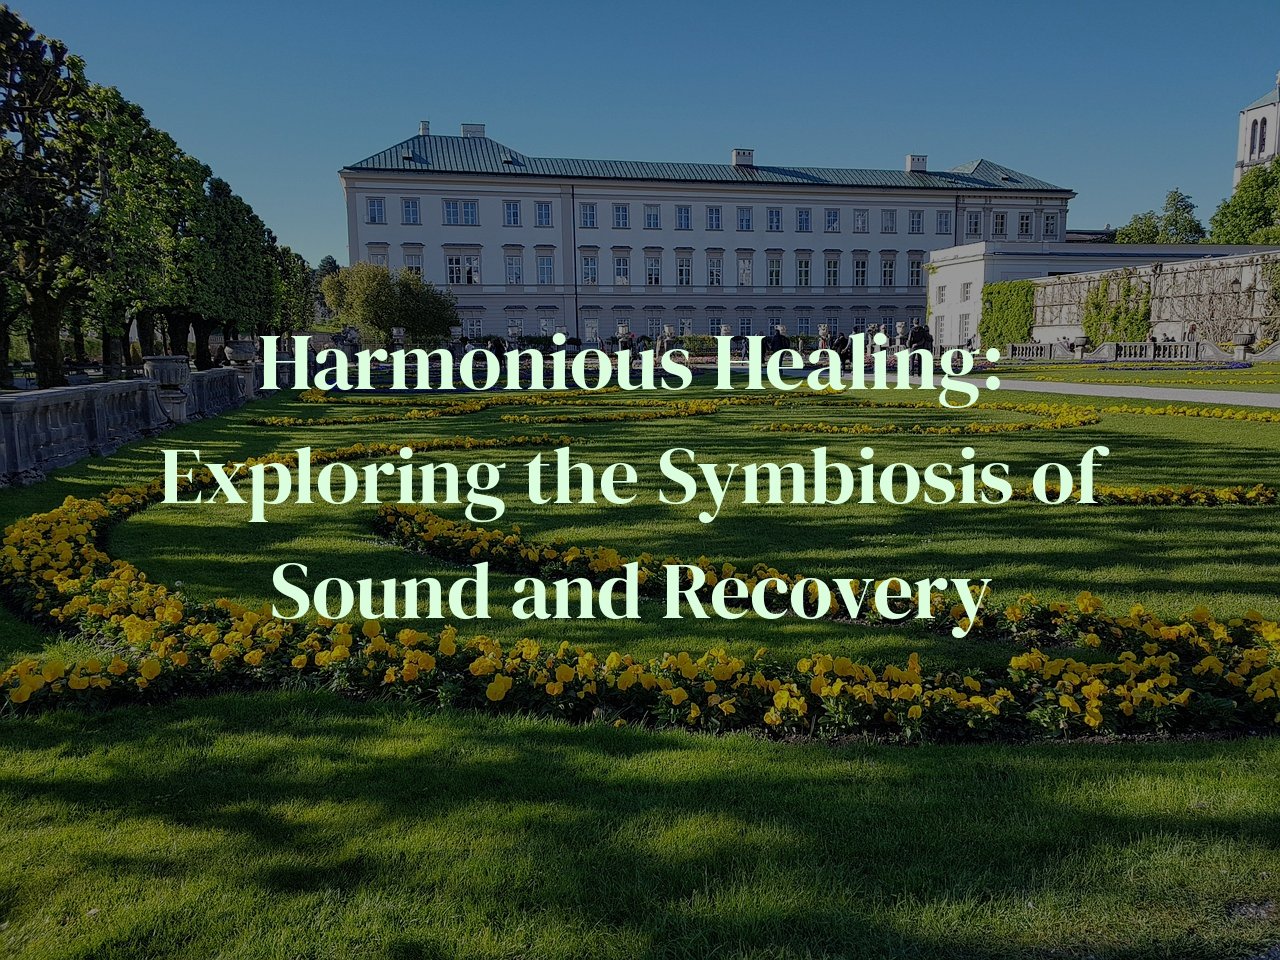 Harmonious Healing: Exploring the Symbiosis of Sound and Recovery